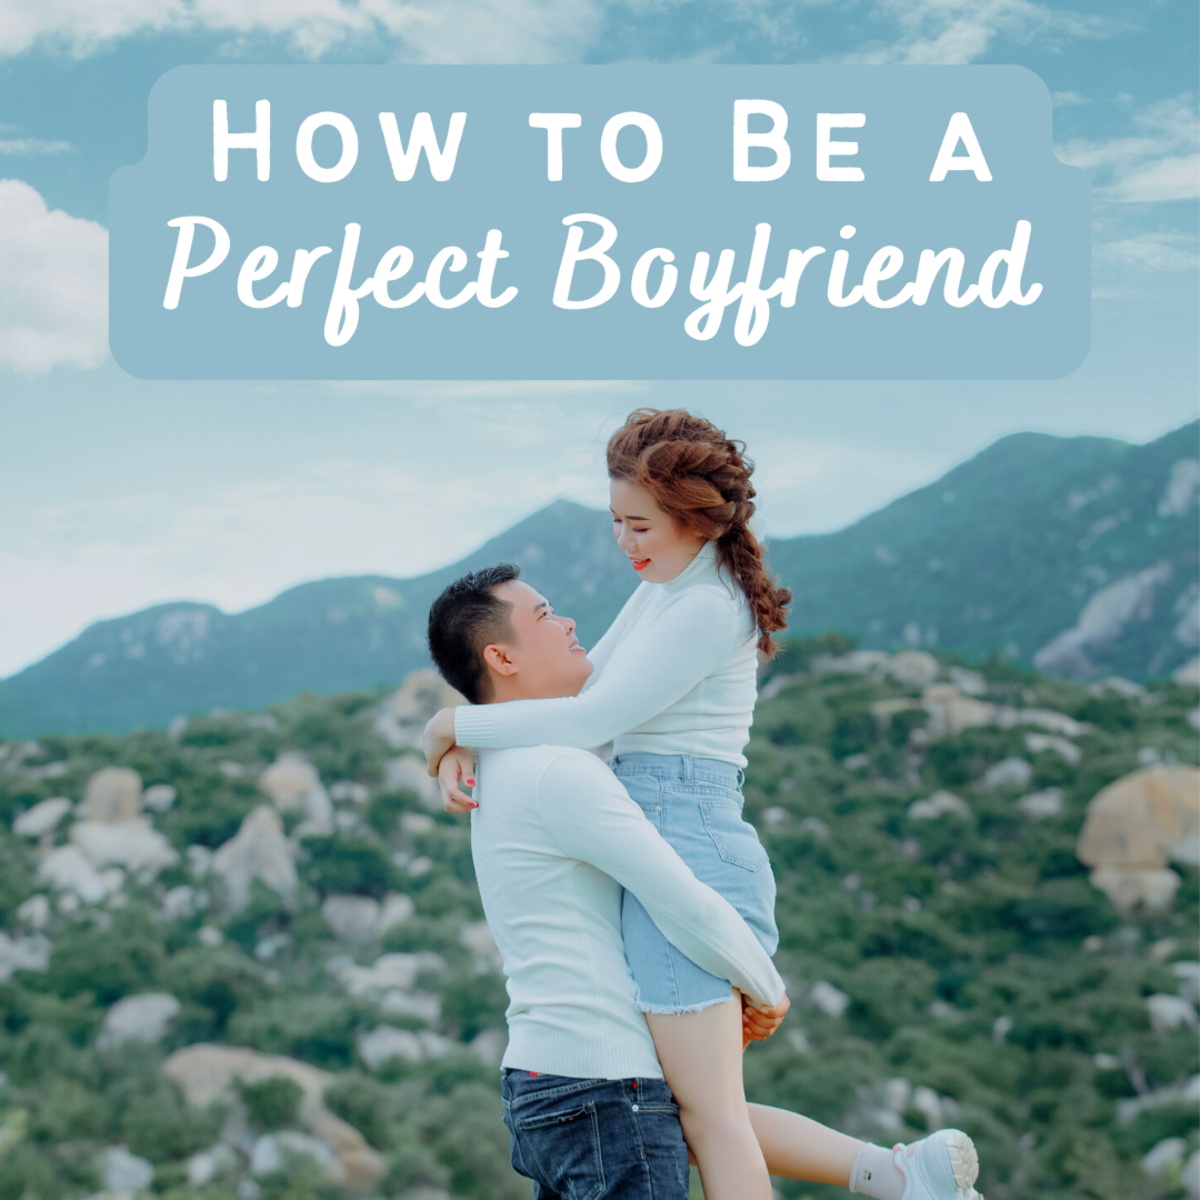 Do you dream of being the perfect boyfriend? Here are 75 ways you can make that happen.